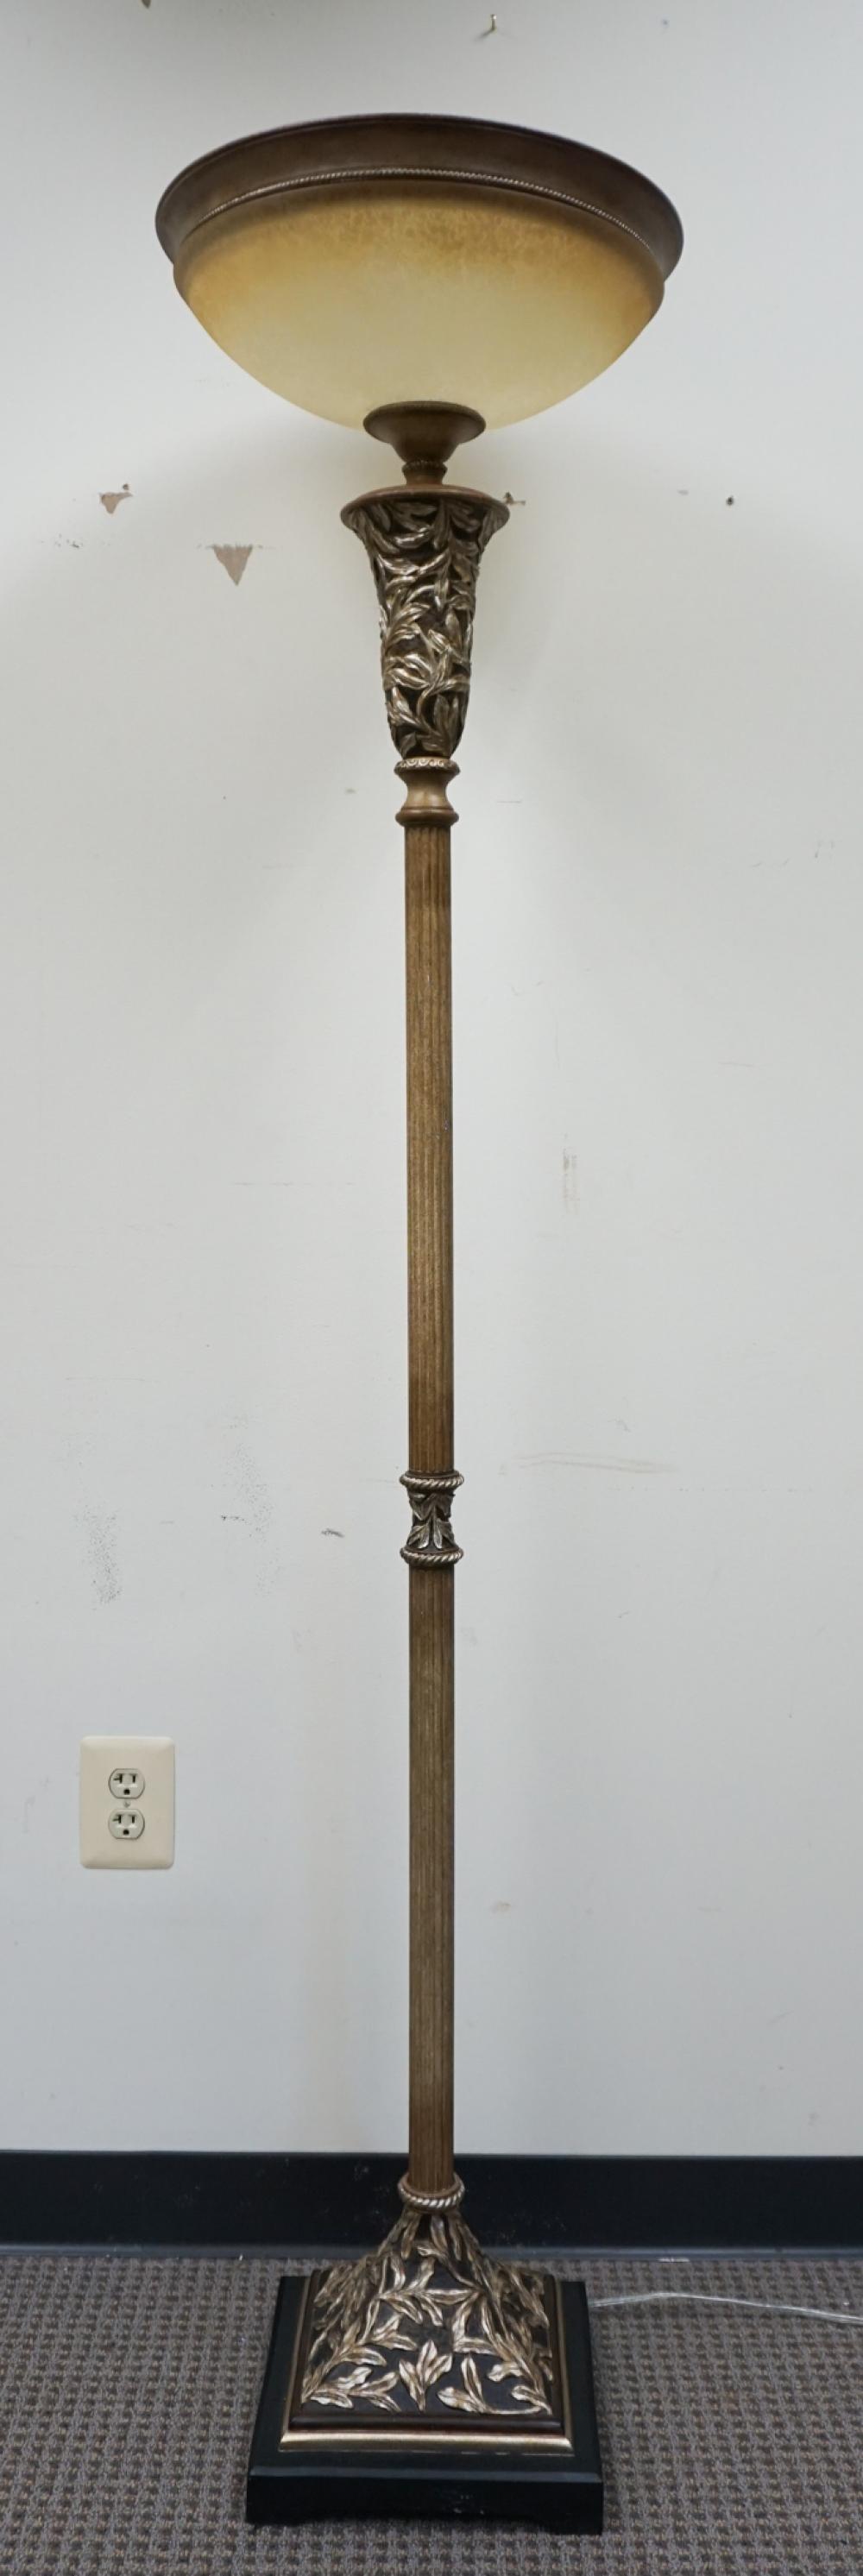 NEOCLASSICAL STYLE PARTIAL GILT 3296c5